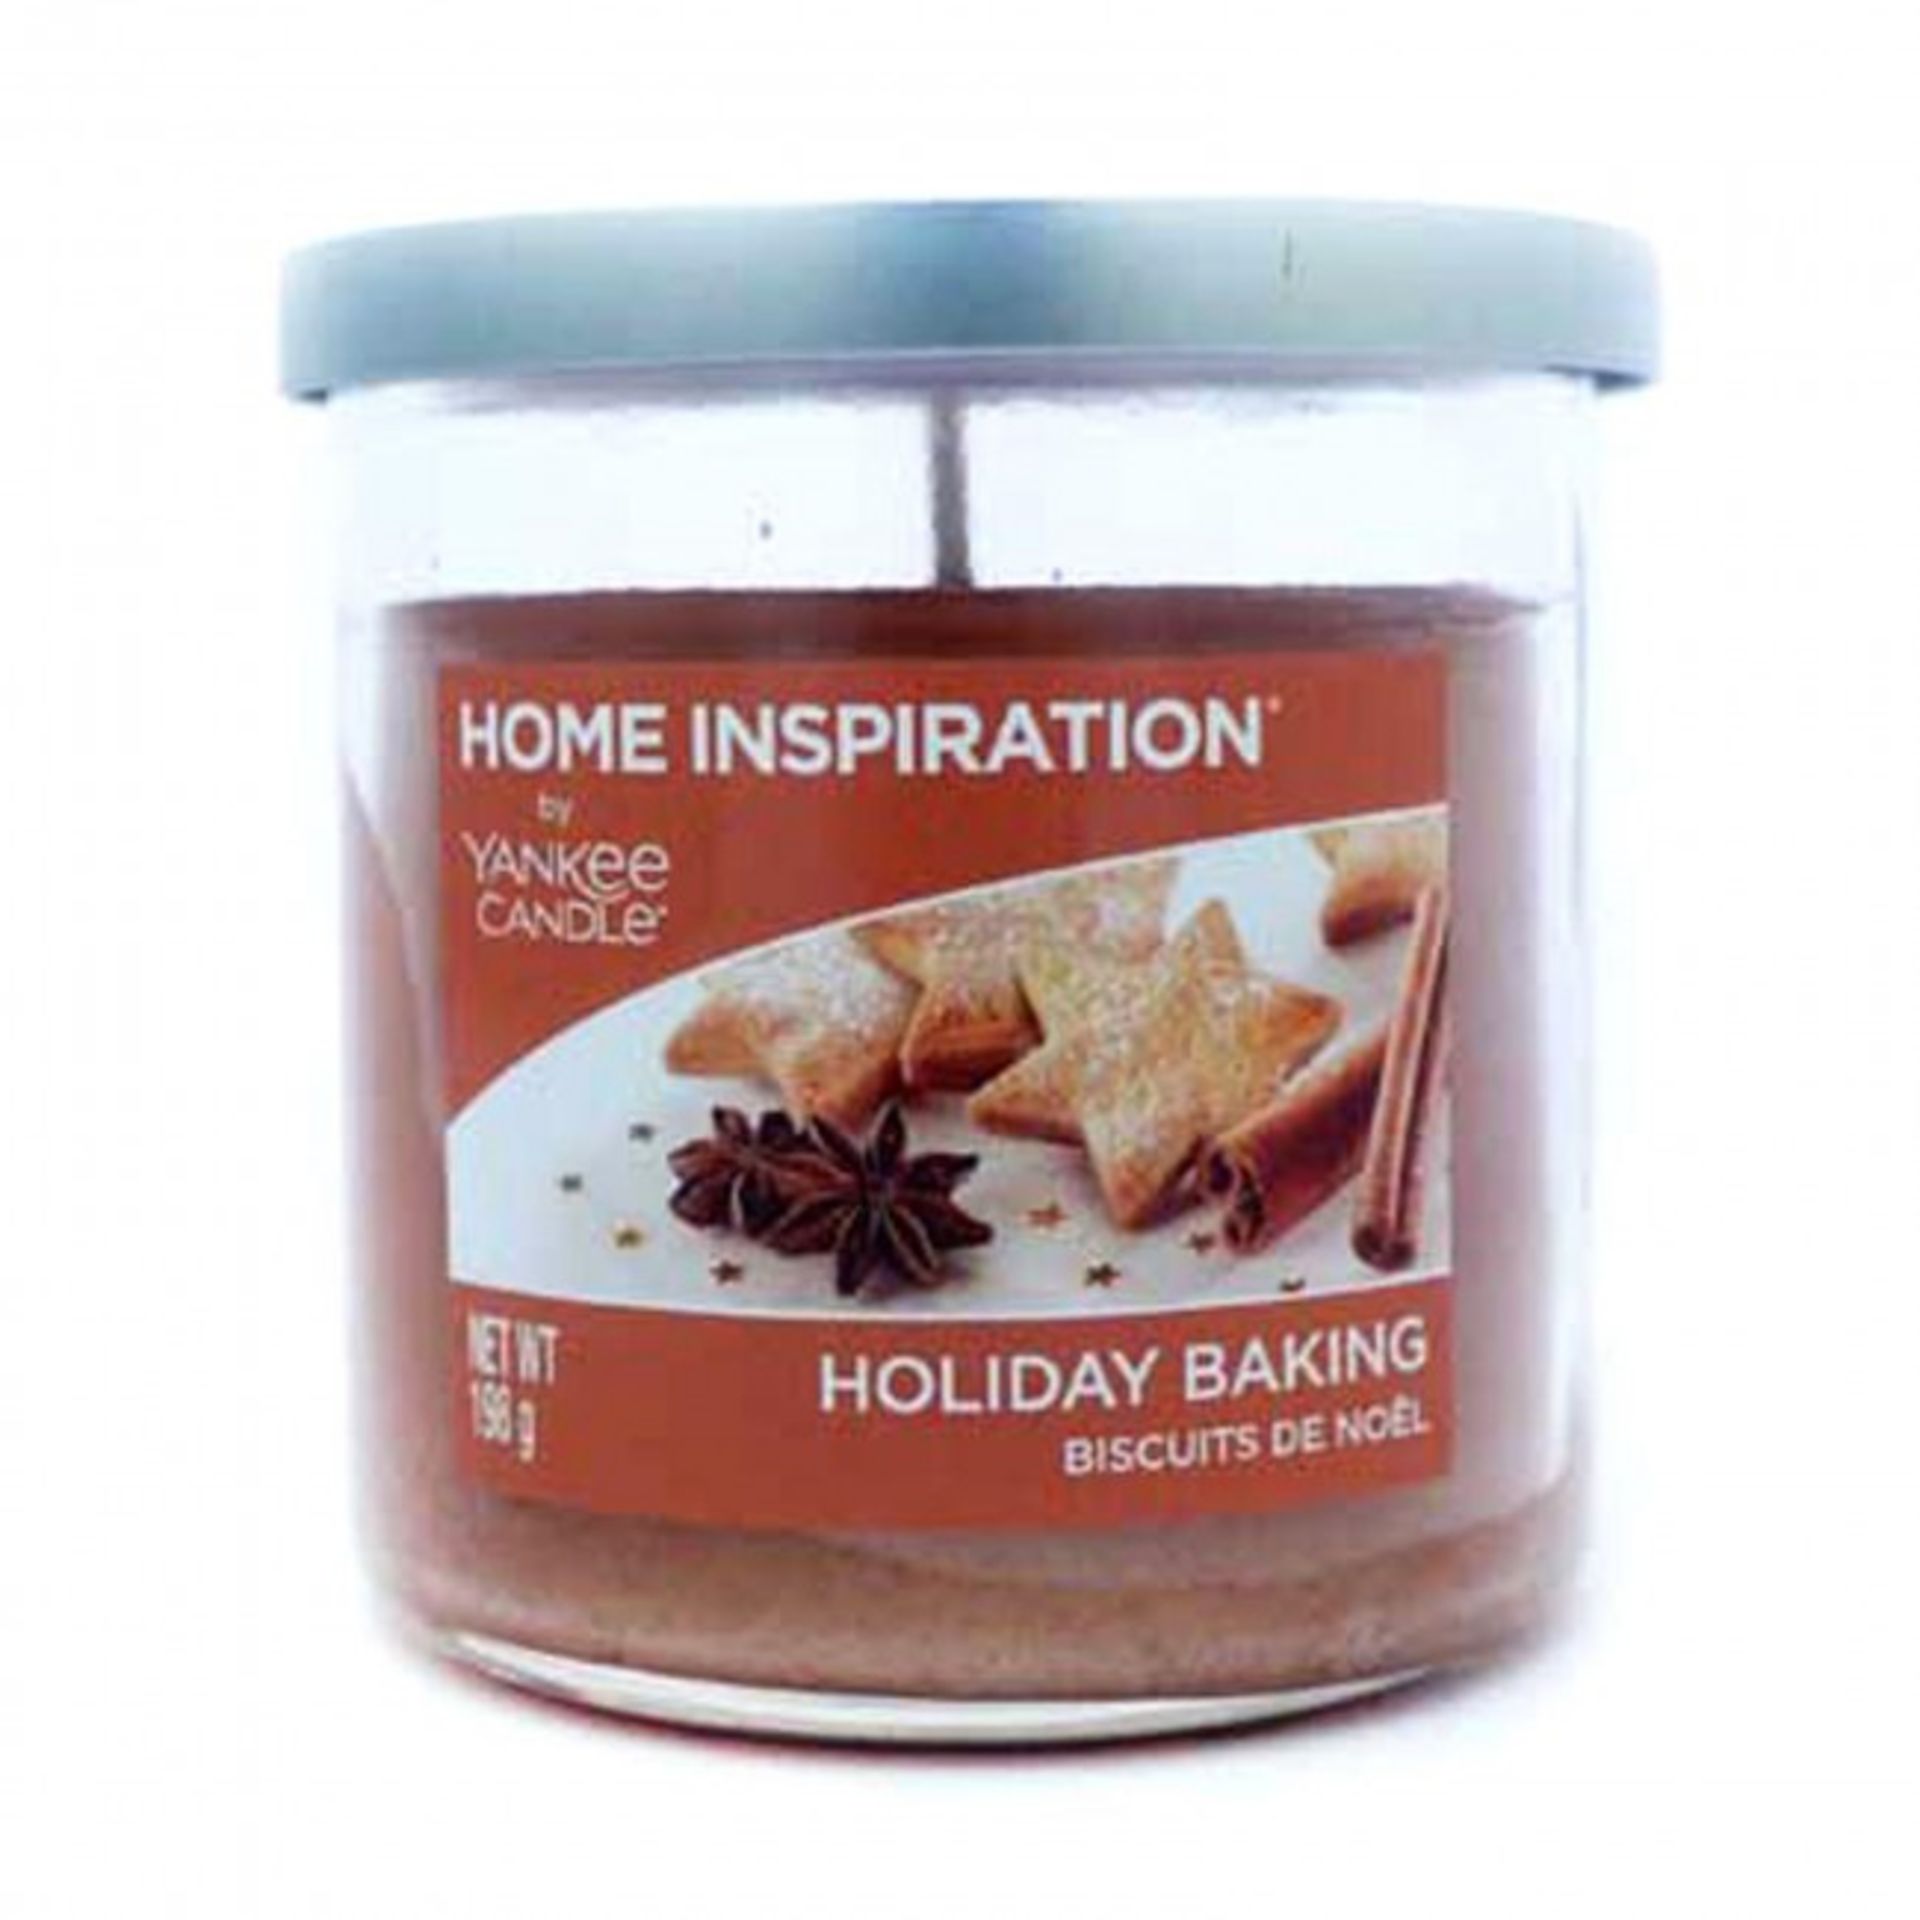 V *TRADE QTY* Brand New Home Inspiration by Yankee Candle Holiday Baking 198g Tumbler Candle -